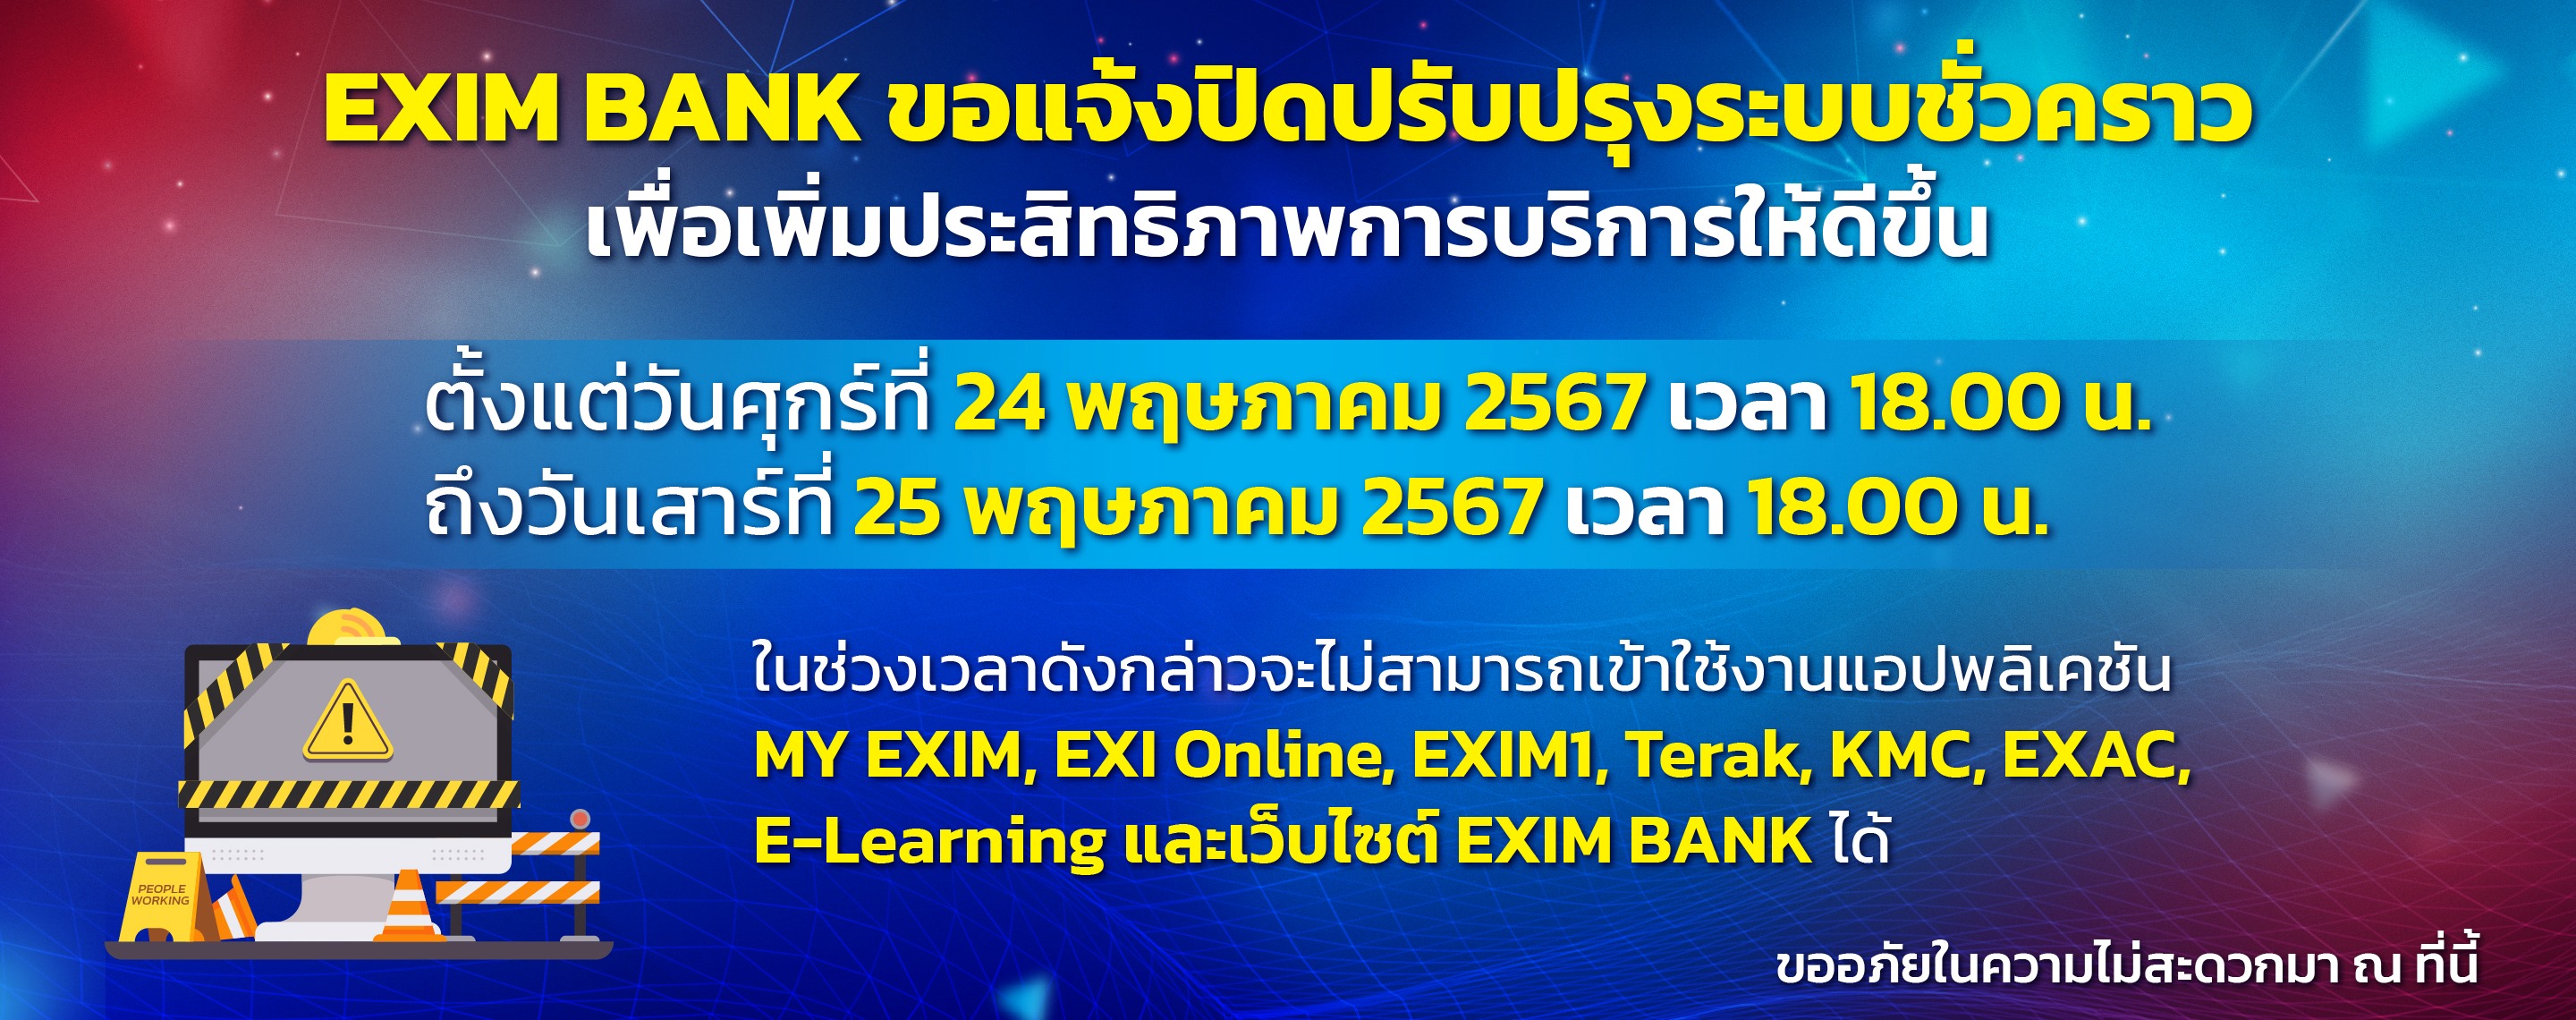 EXIM Thailand Achieves Satisfactory Operating Result in 2009